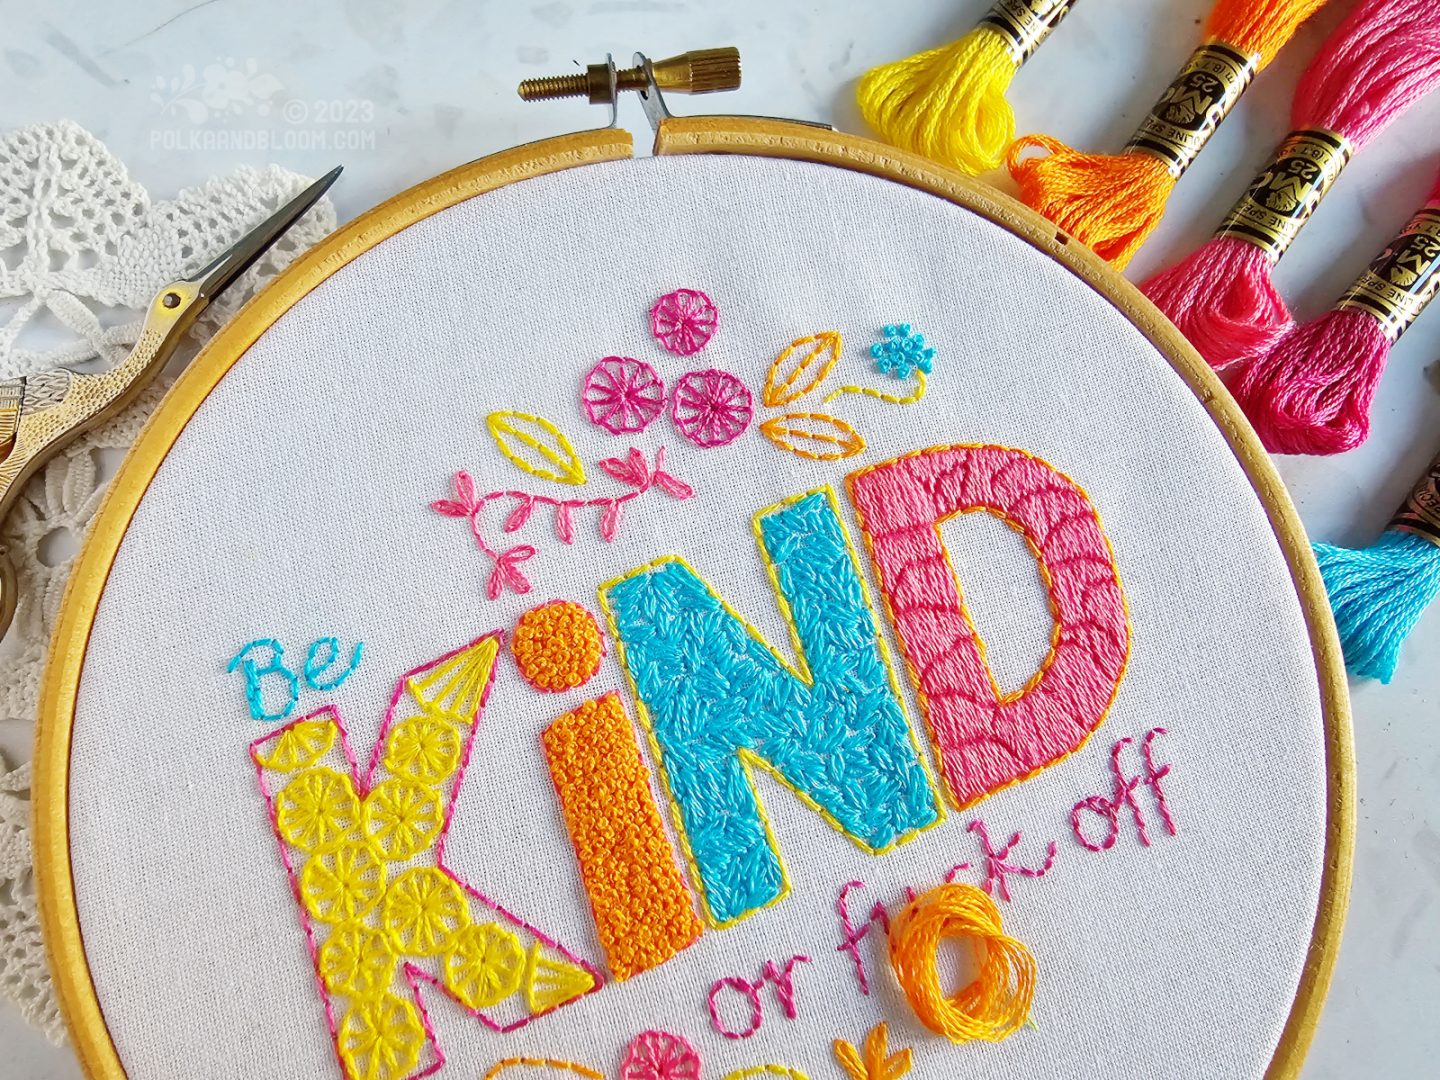 Close view of an embroidery hoop with white fabric. On the fabric is embroidered be kind or fuck off, using yellow, orange, pink and turquoise colours.